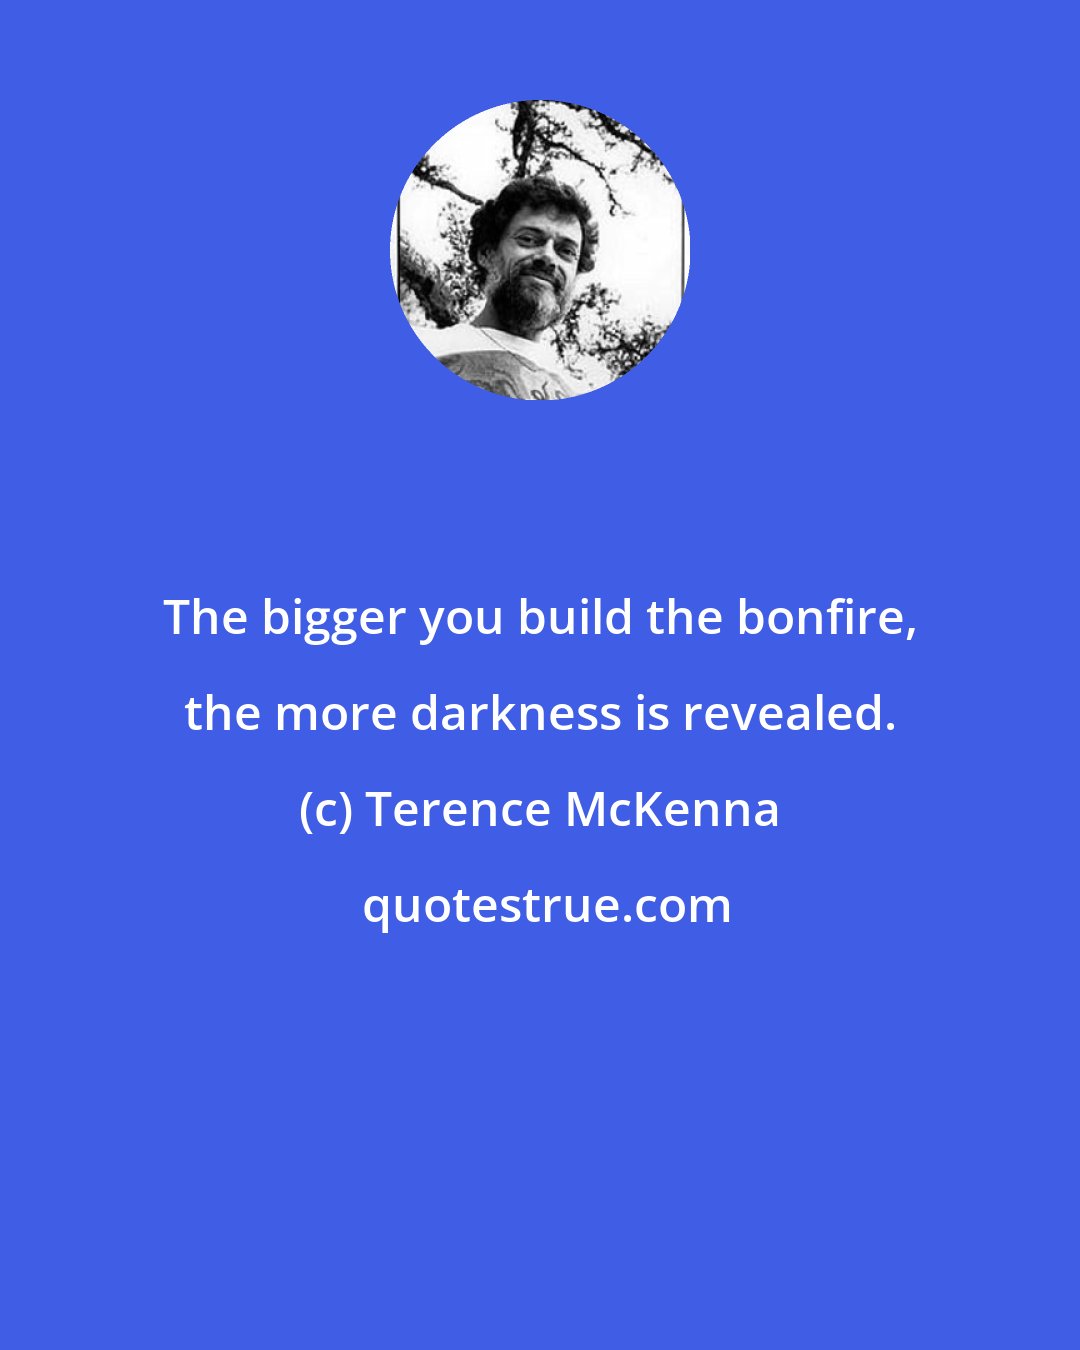 Terence McKenna: The bigger you build the bonfire, the more darkness is revealed.